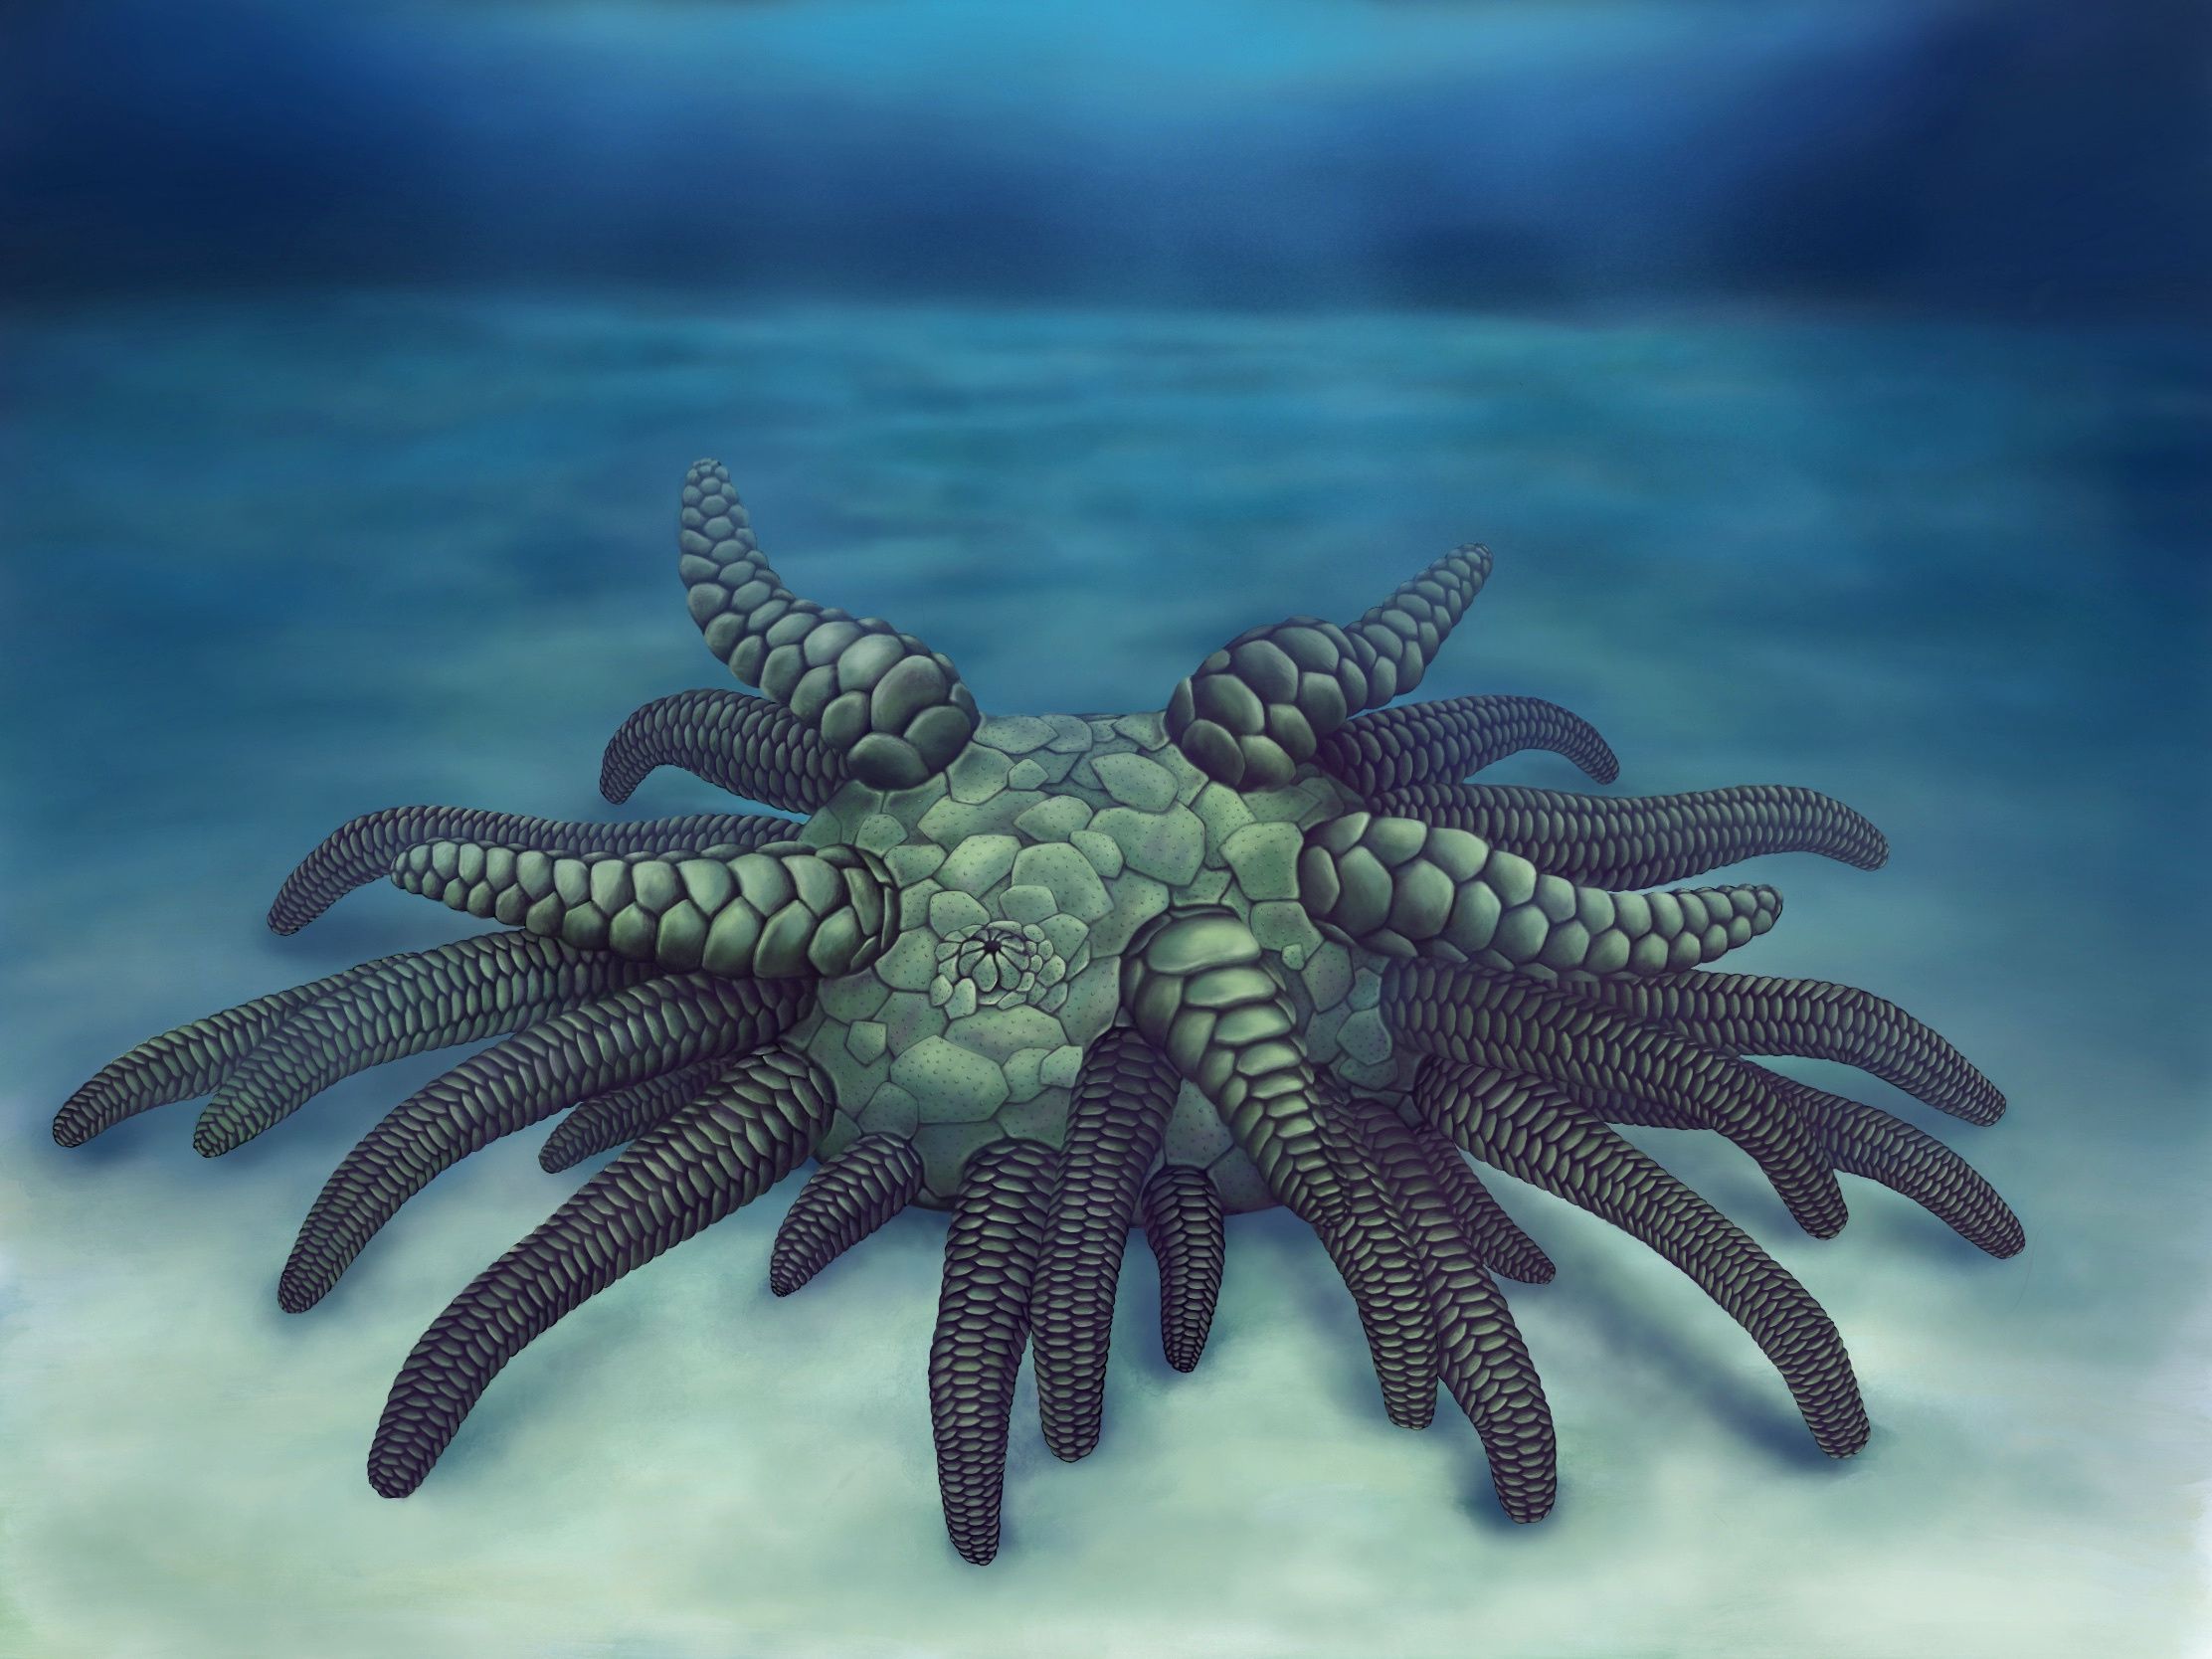 Sollasina Cthulhu: Monstrous 430 Million-Year-Old Sea Cucumber Discovered